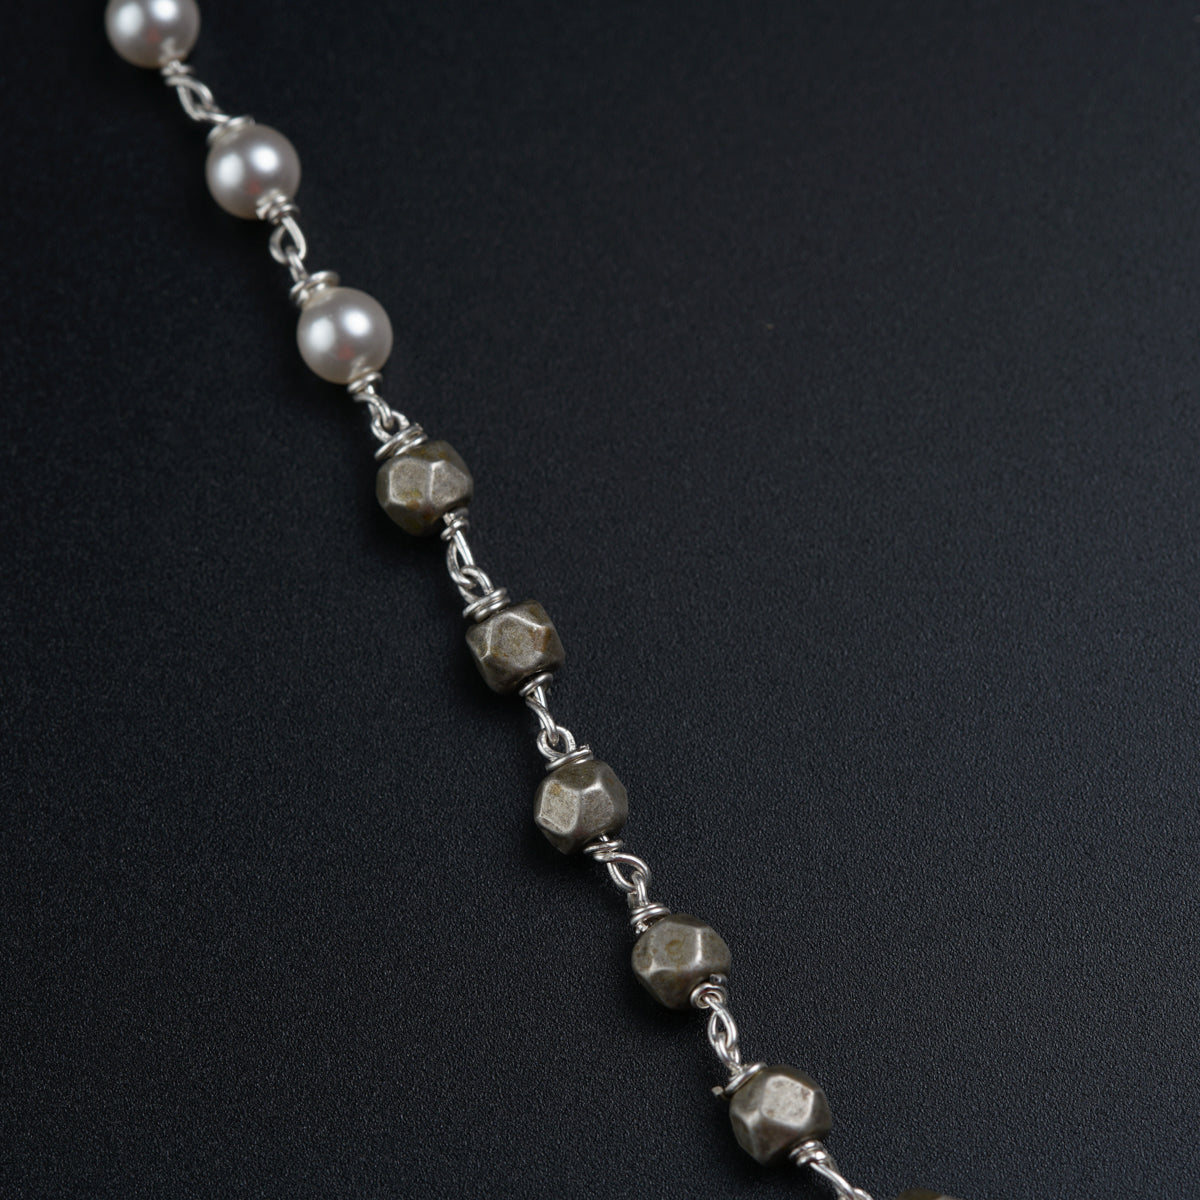 a silver chain with a bunch of pearls on it